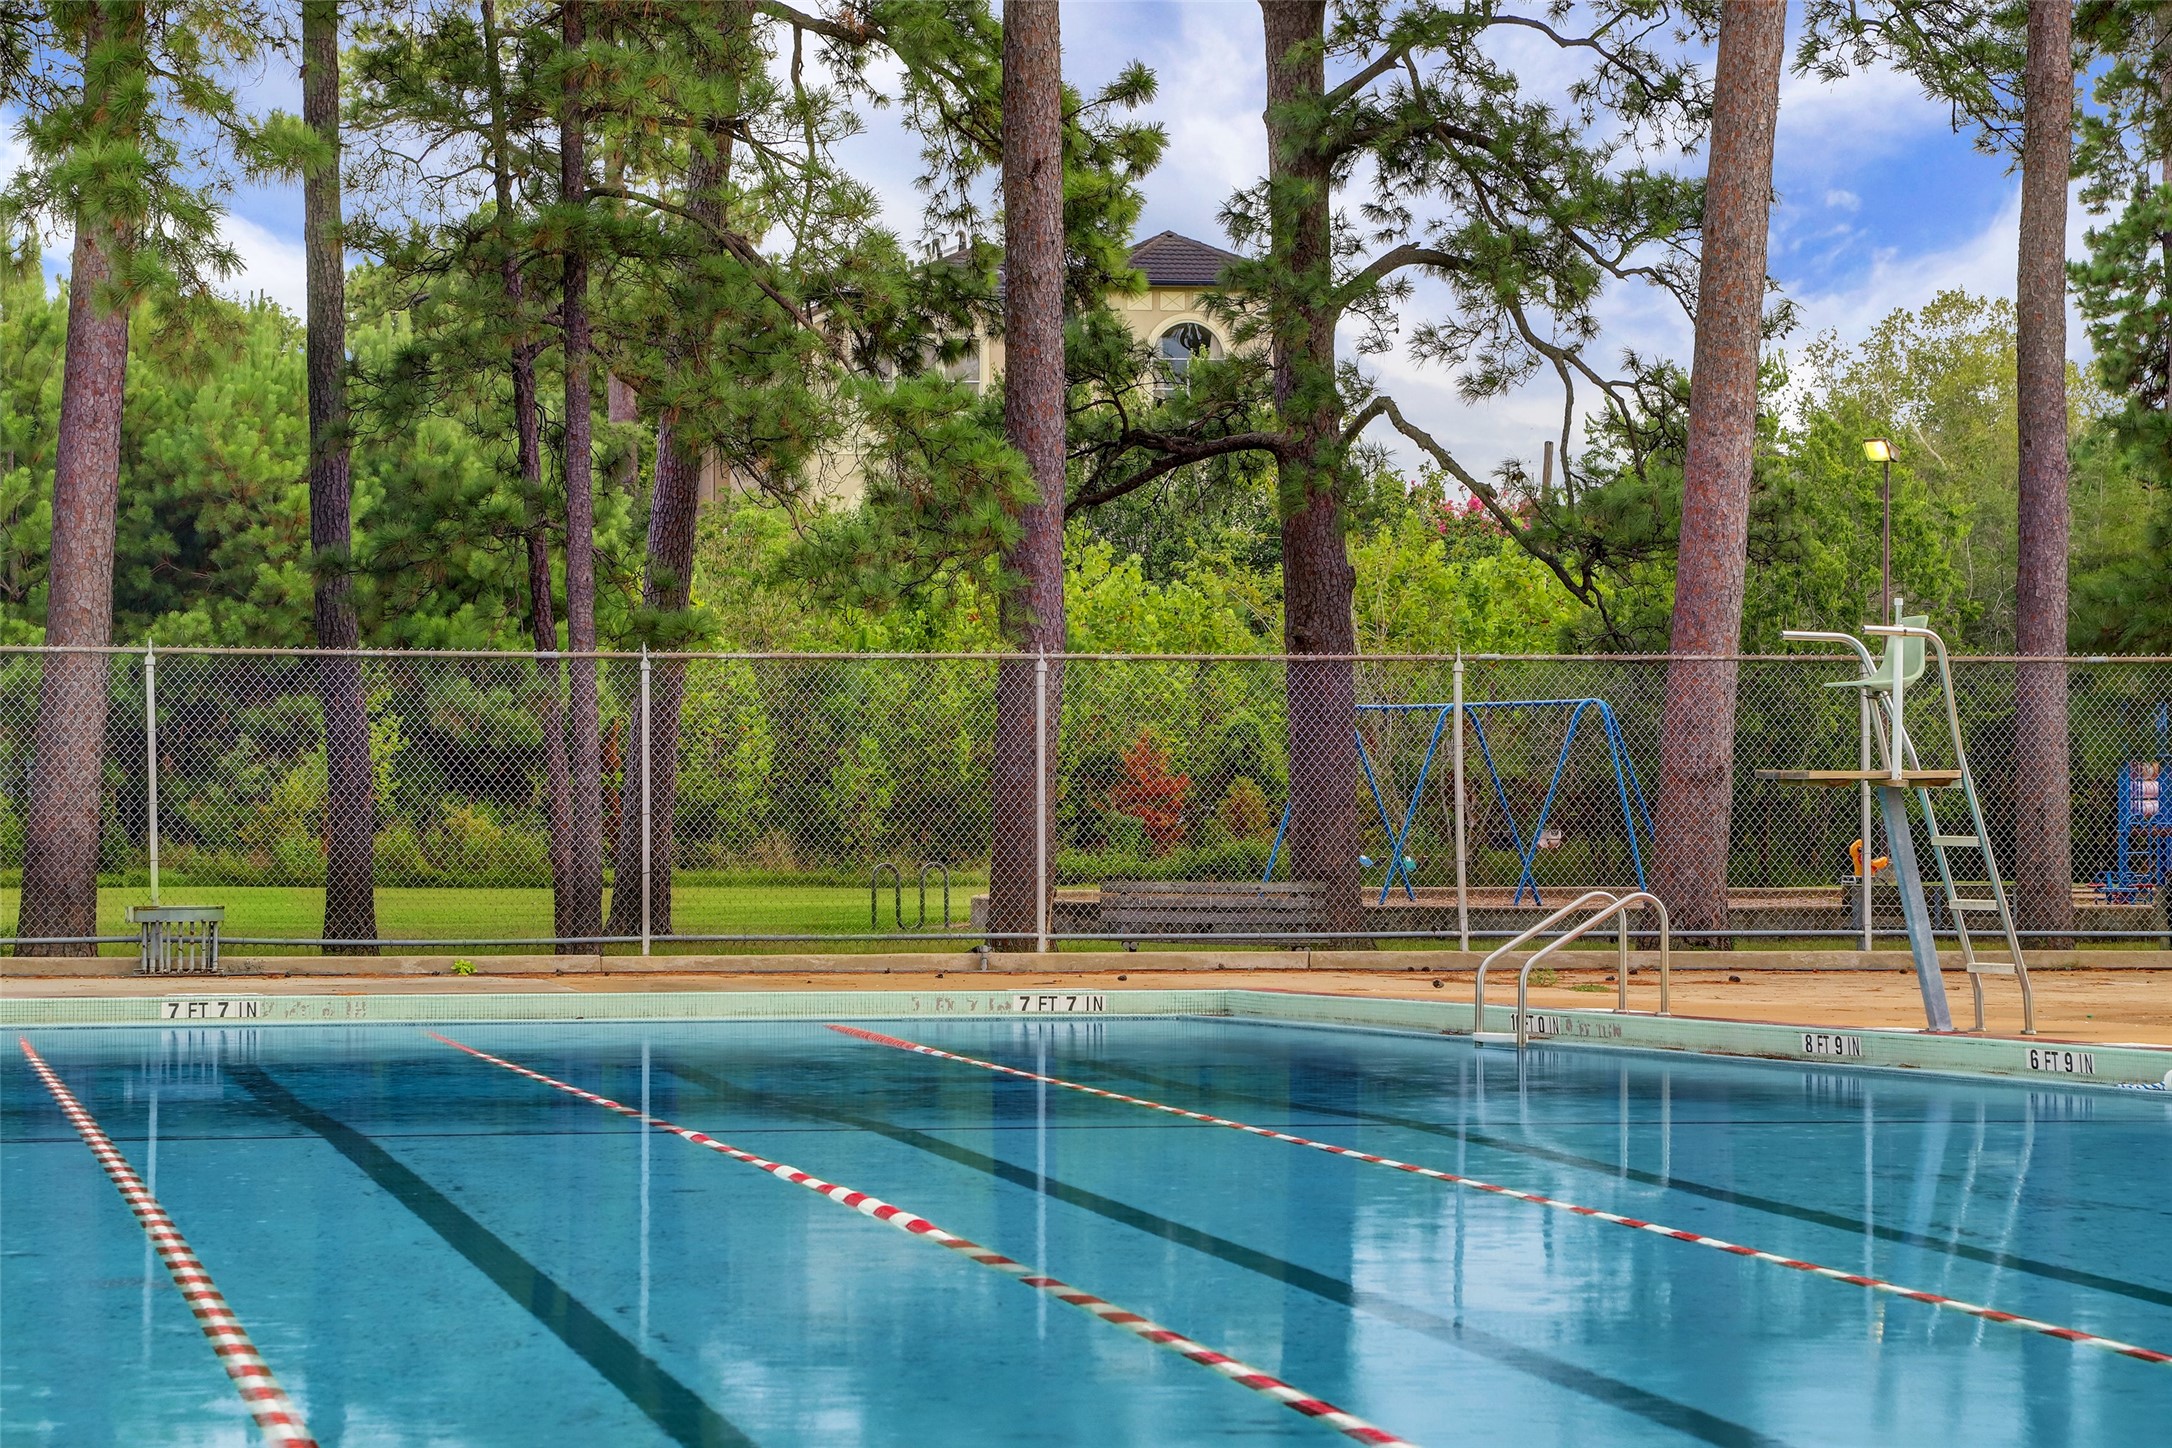 The Memorial Park public neighborhood swimming pool is the perfect place to cool off on those hot Houston summer afternoons.